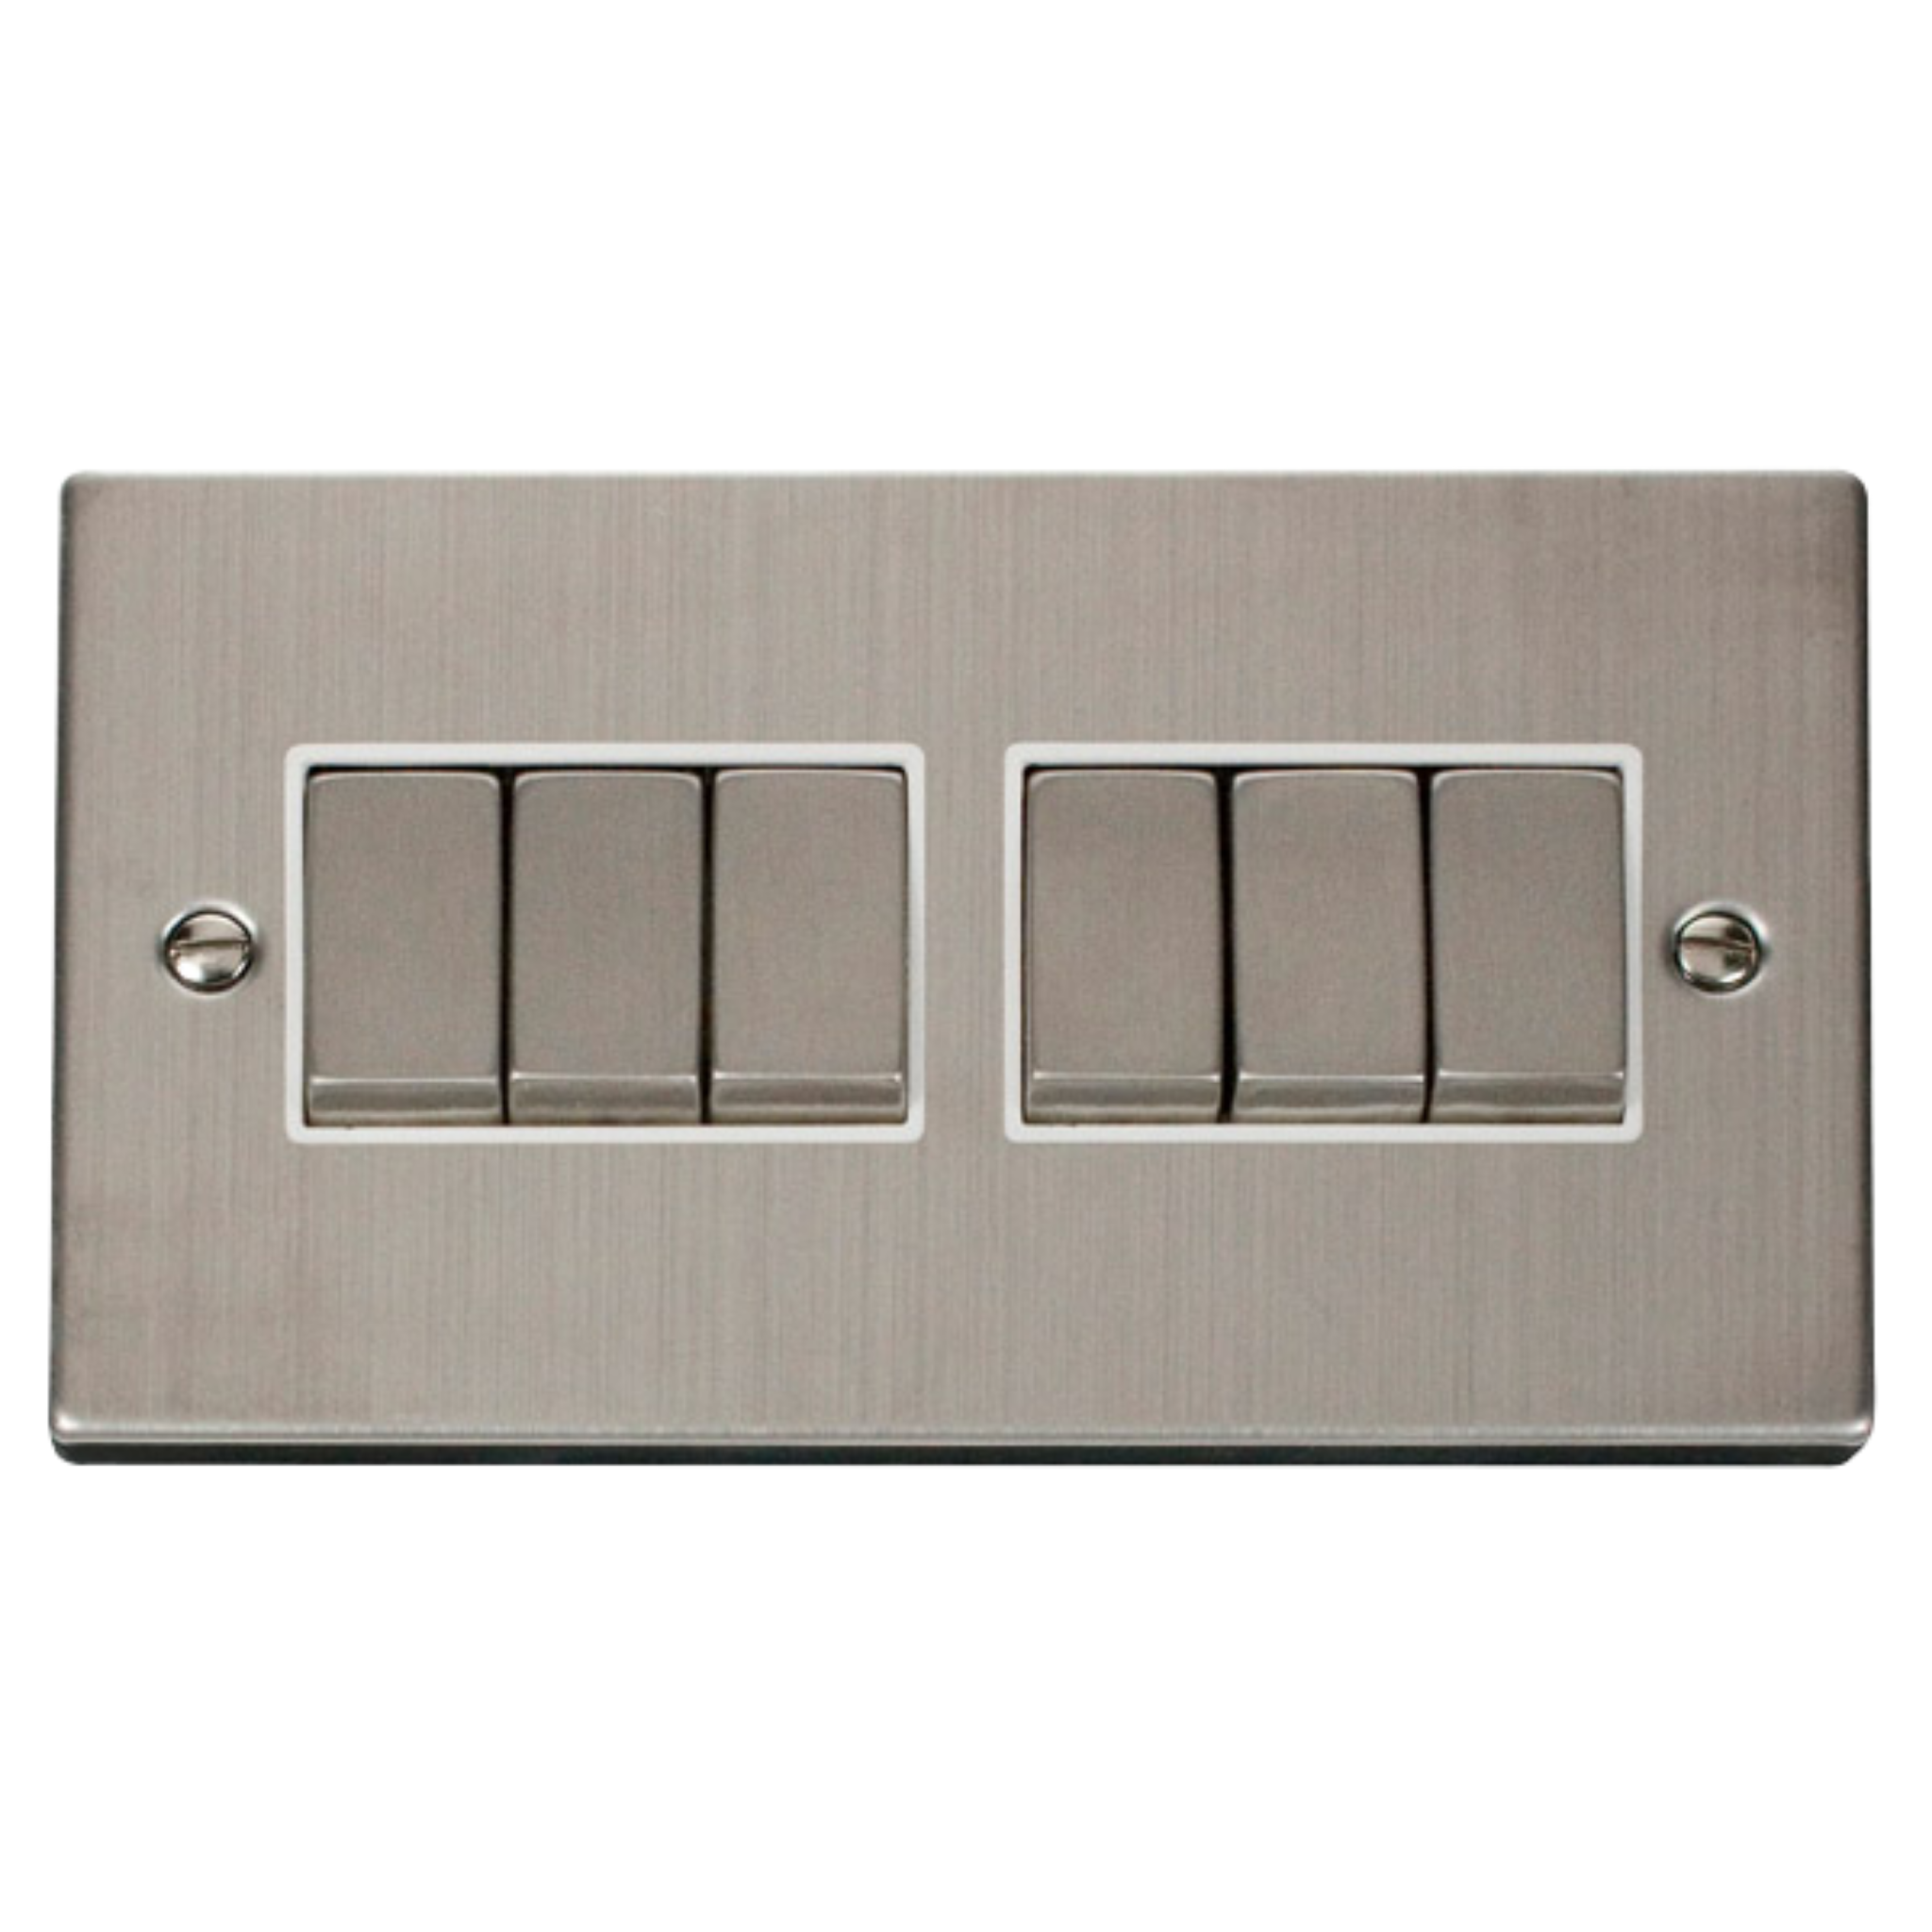 Z-Wave Smart Dimmer Switch in Stainless Steel